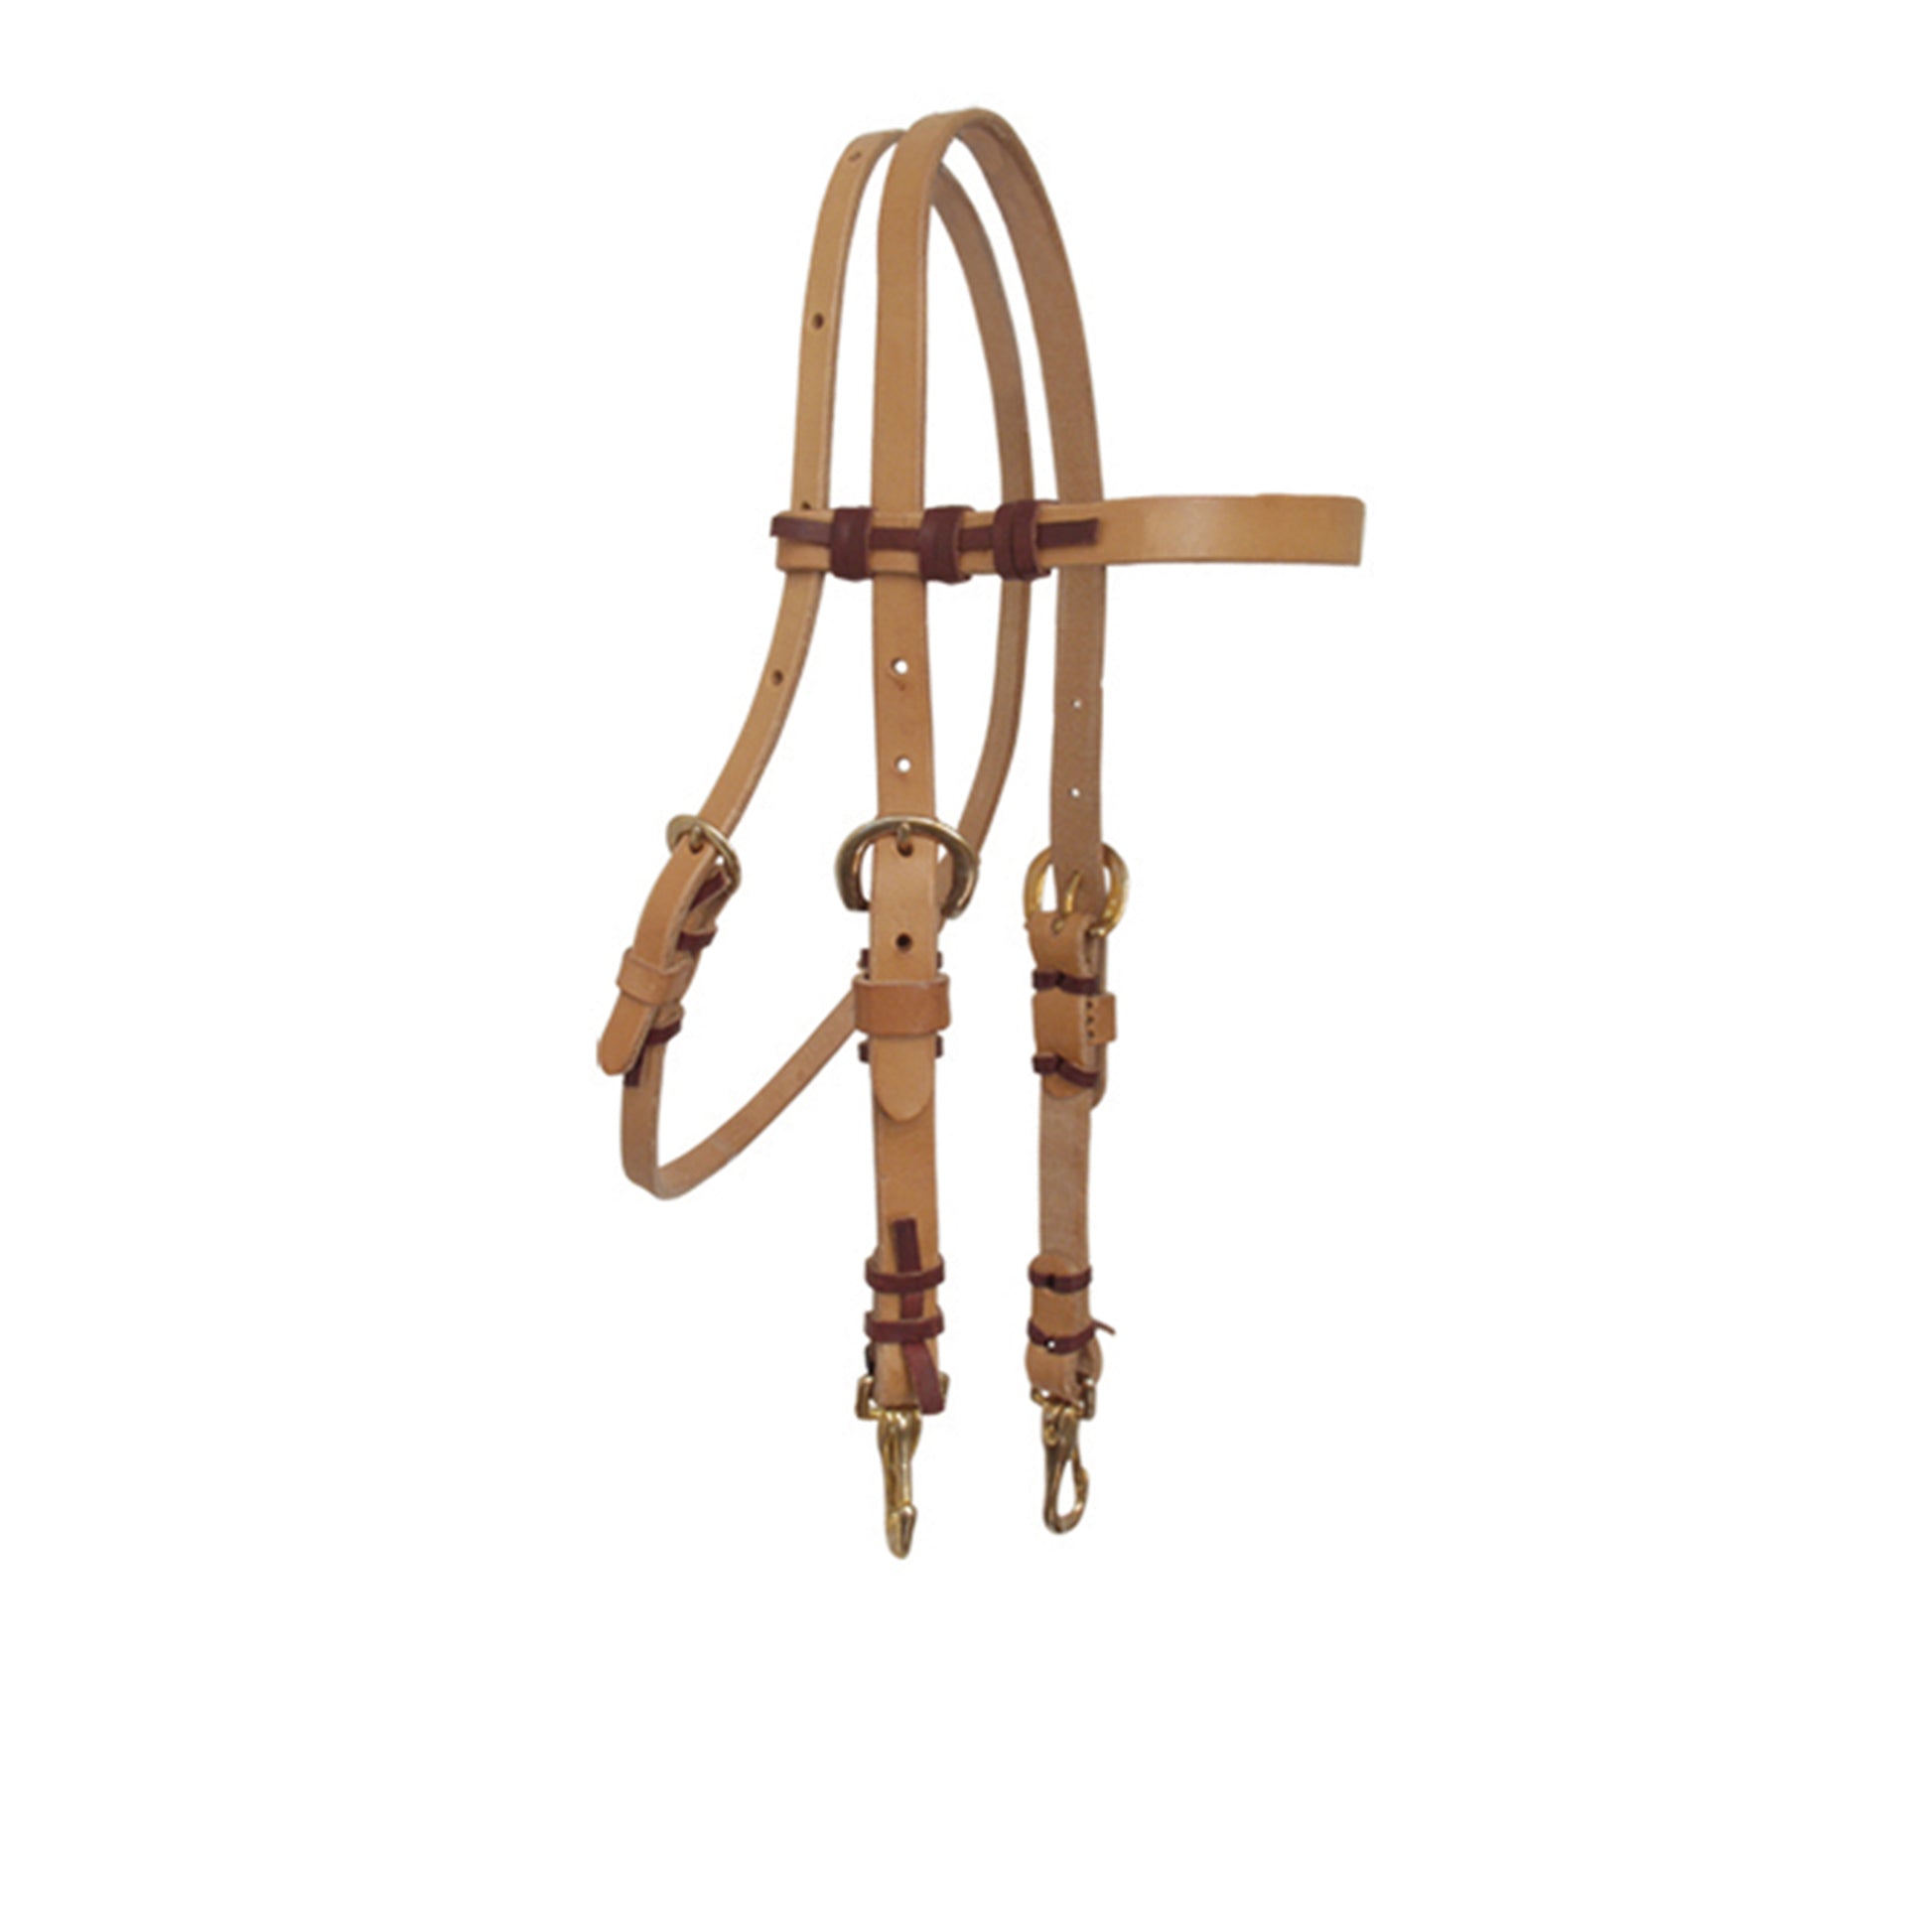 1/2" Straight browband headstall harness leather cowboy ties brass hardware.